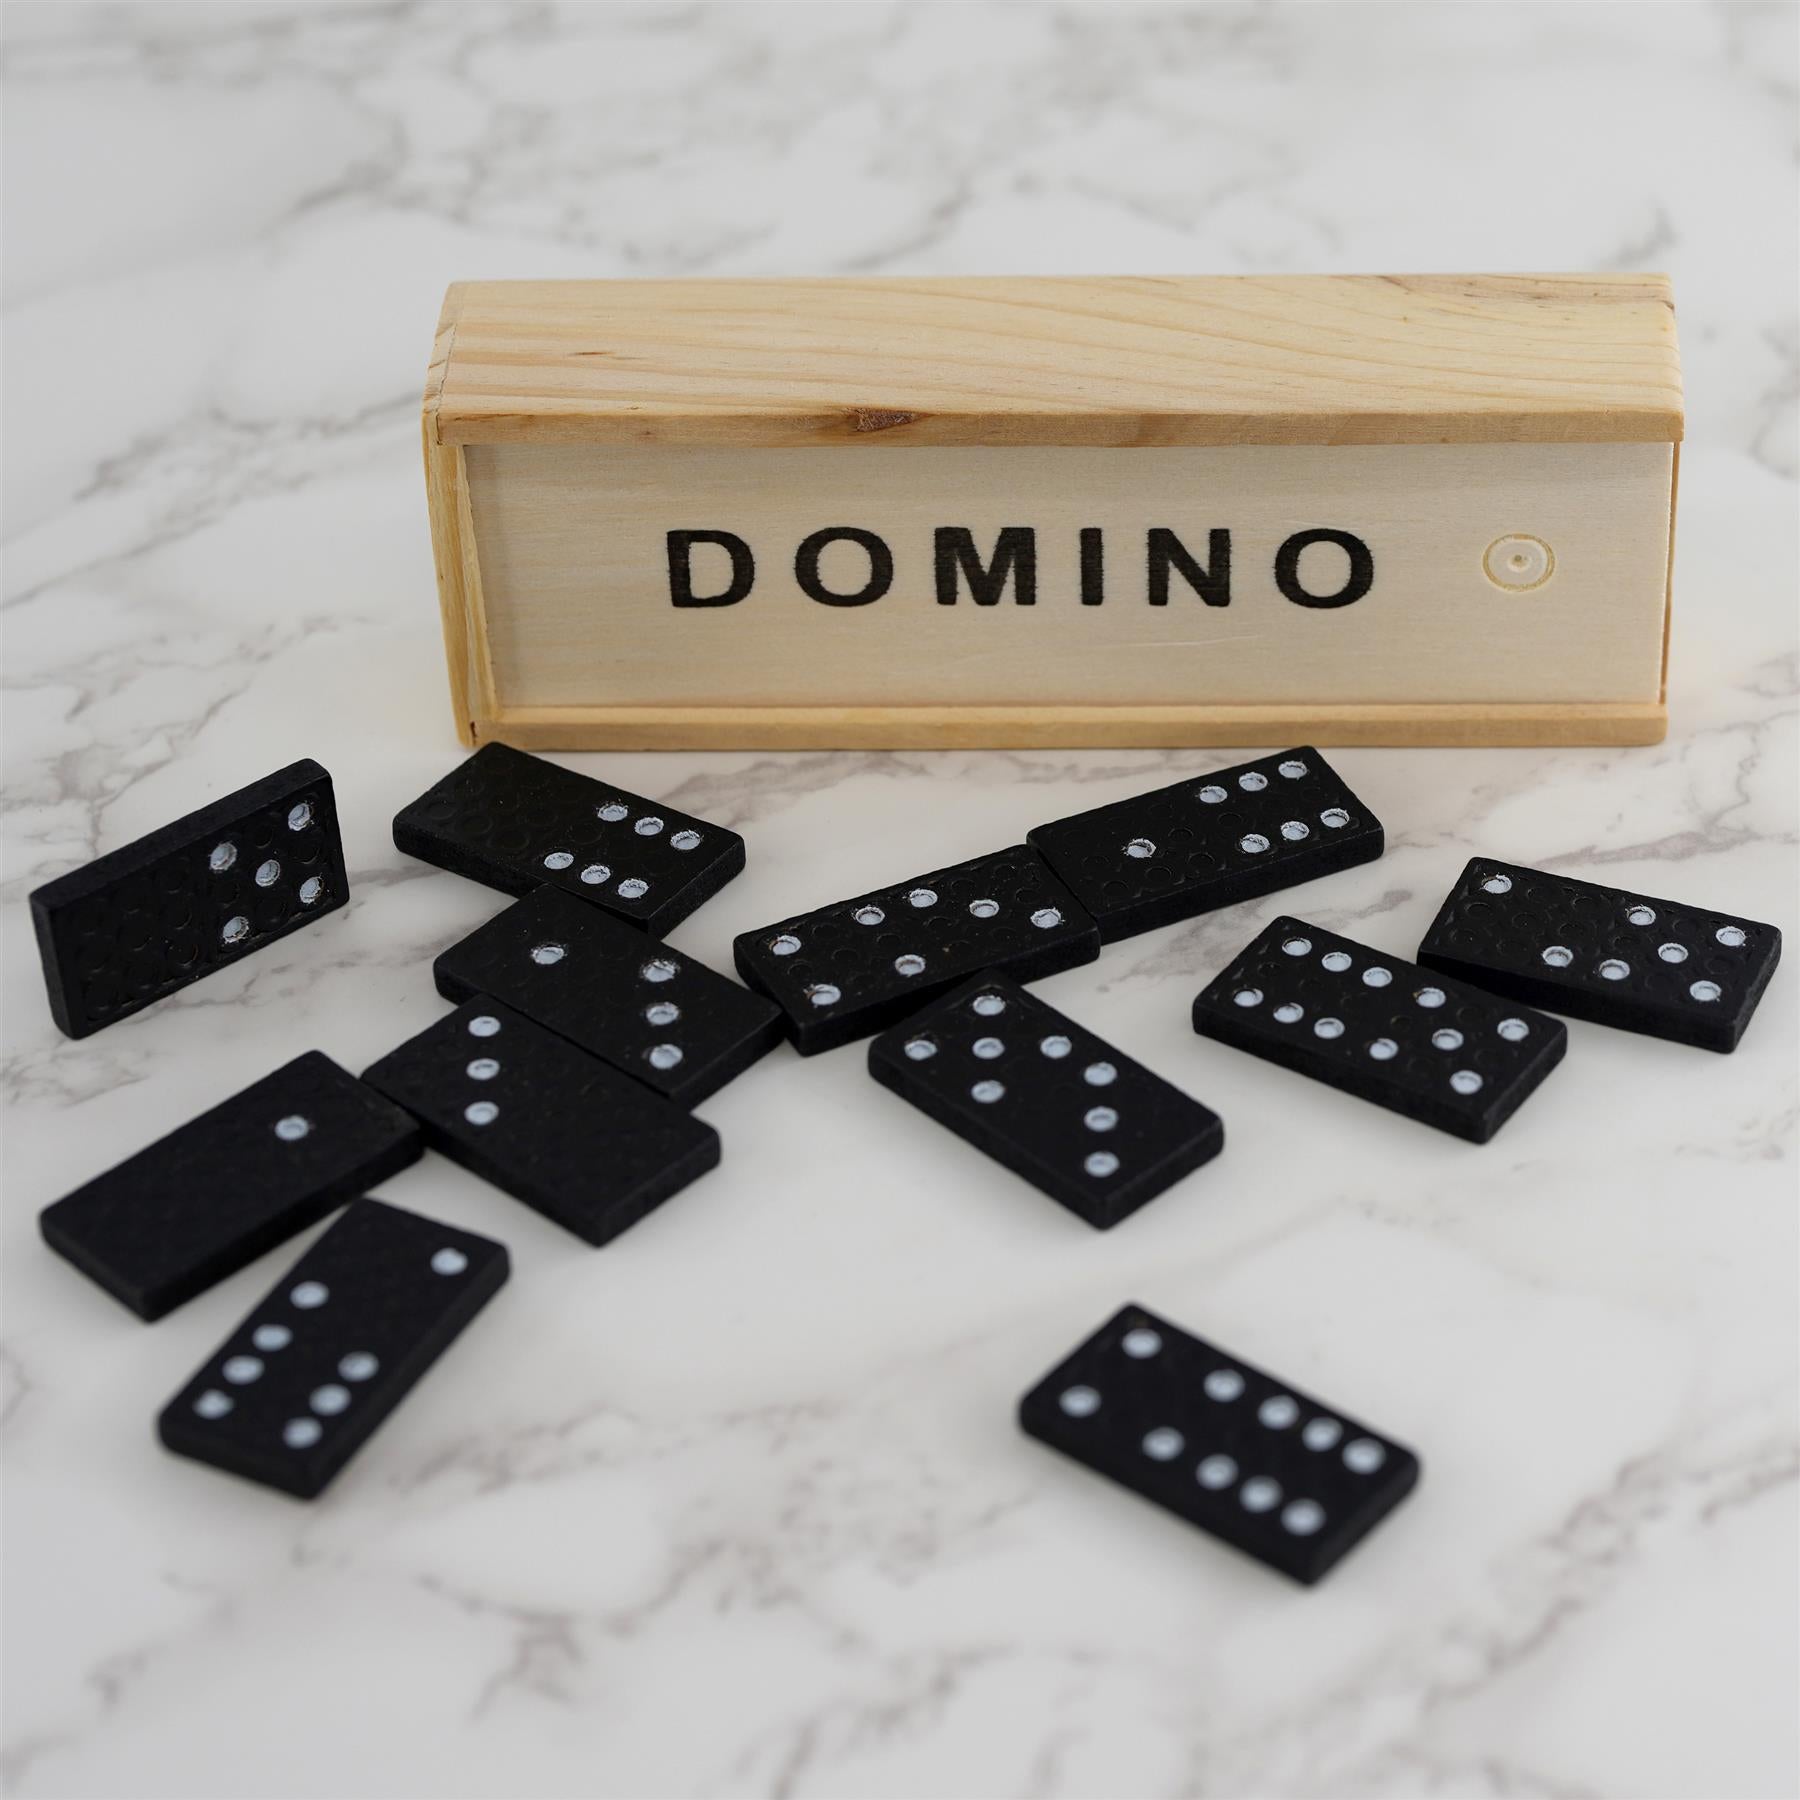 Dominoes Game in Wooden Box by The Magic Toy Shop - UKBuyZone